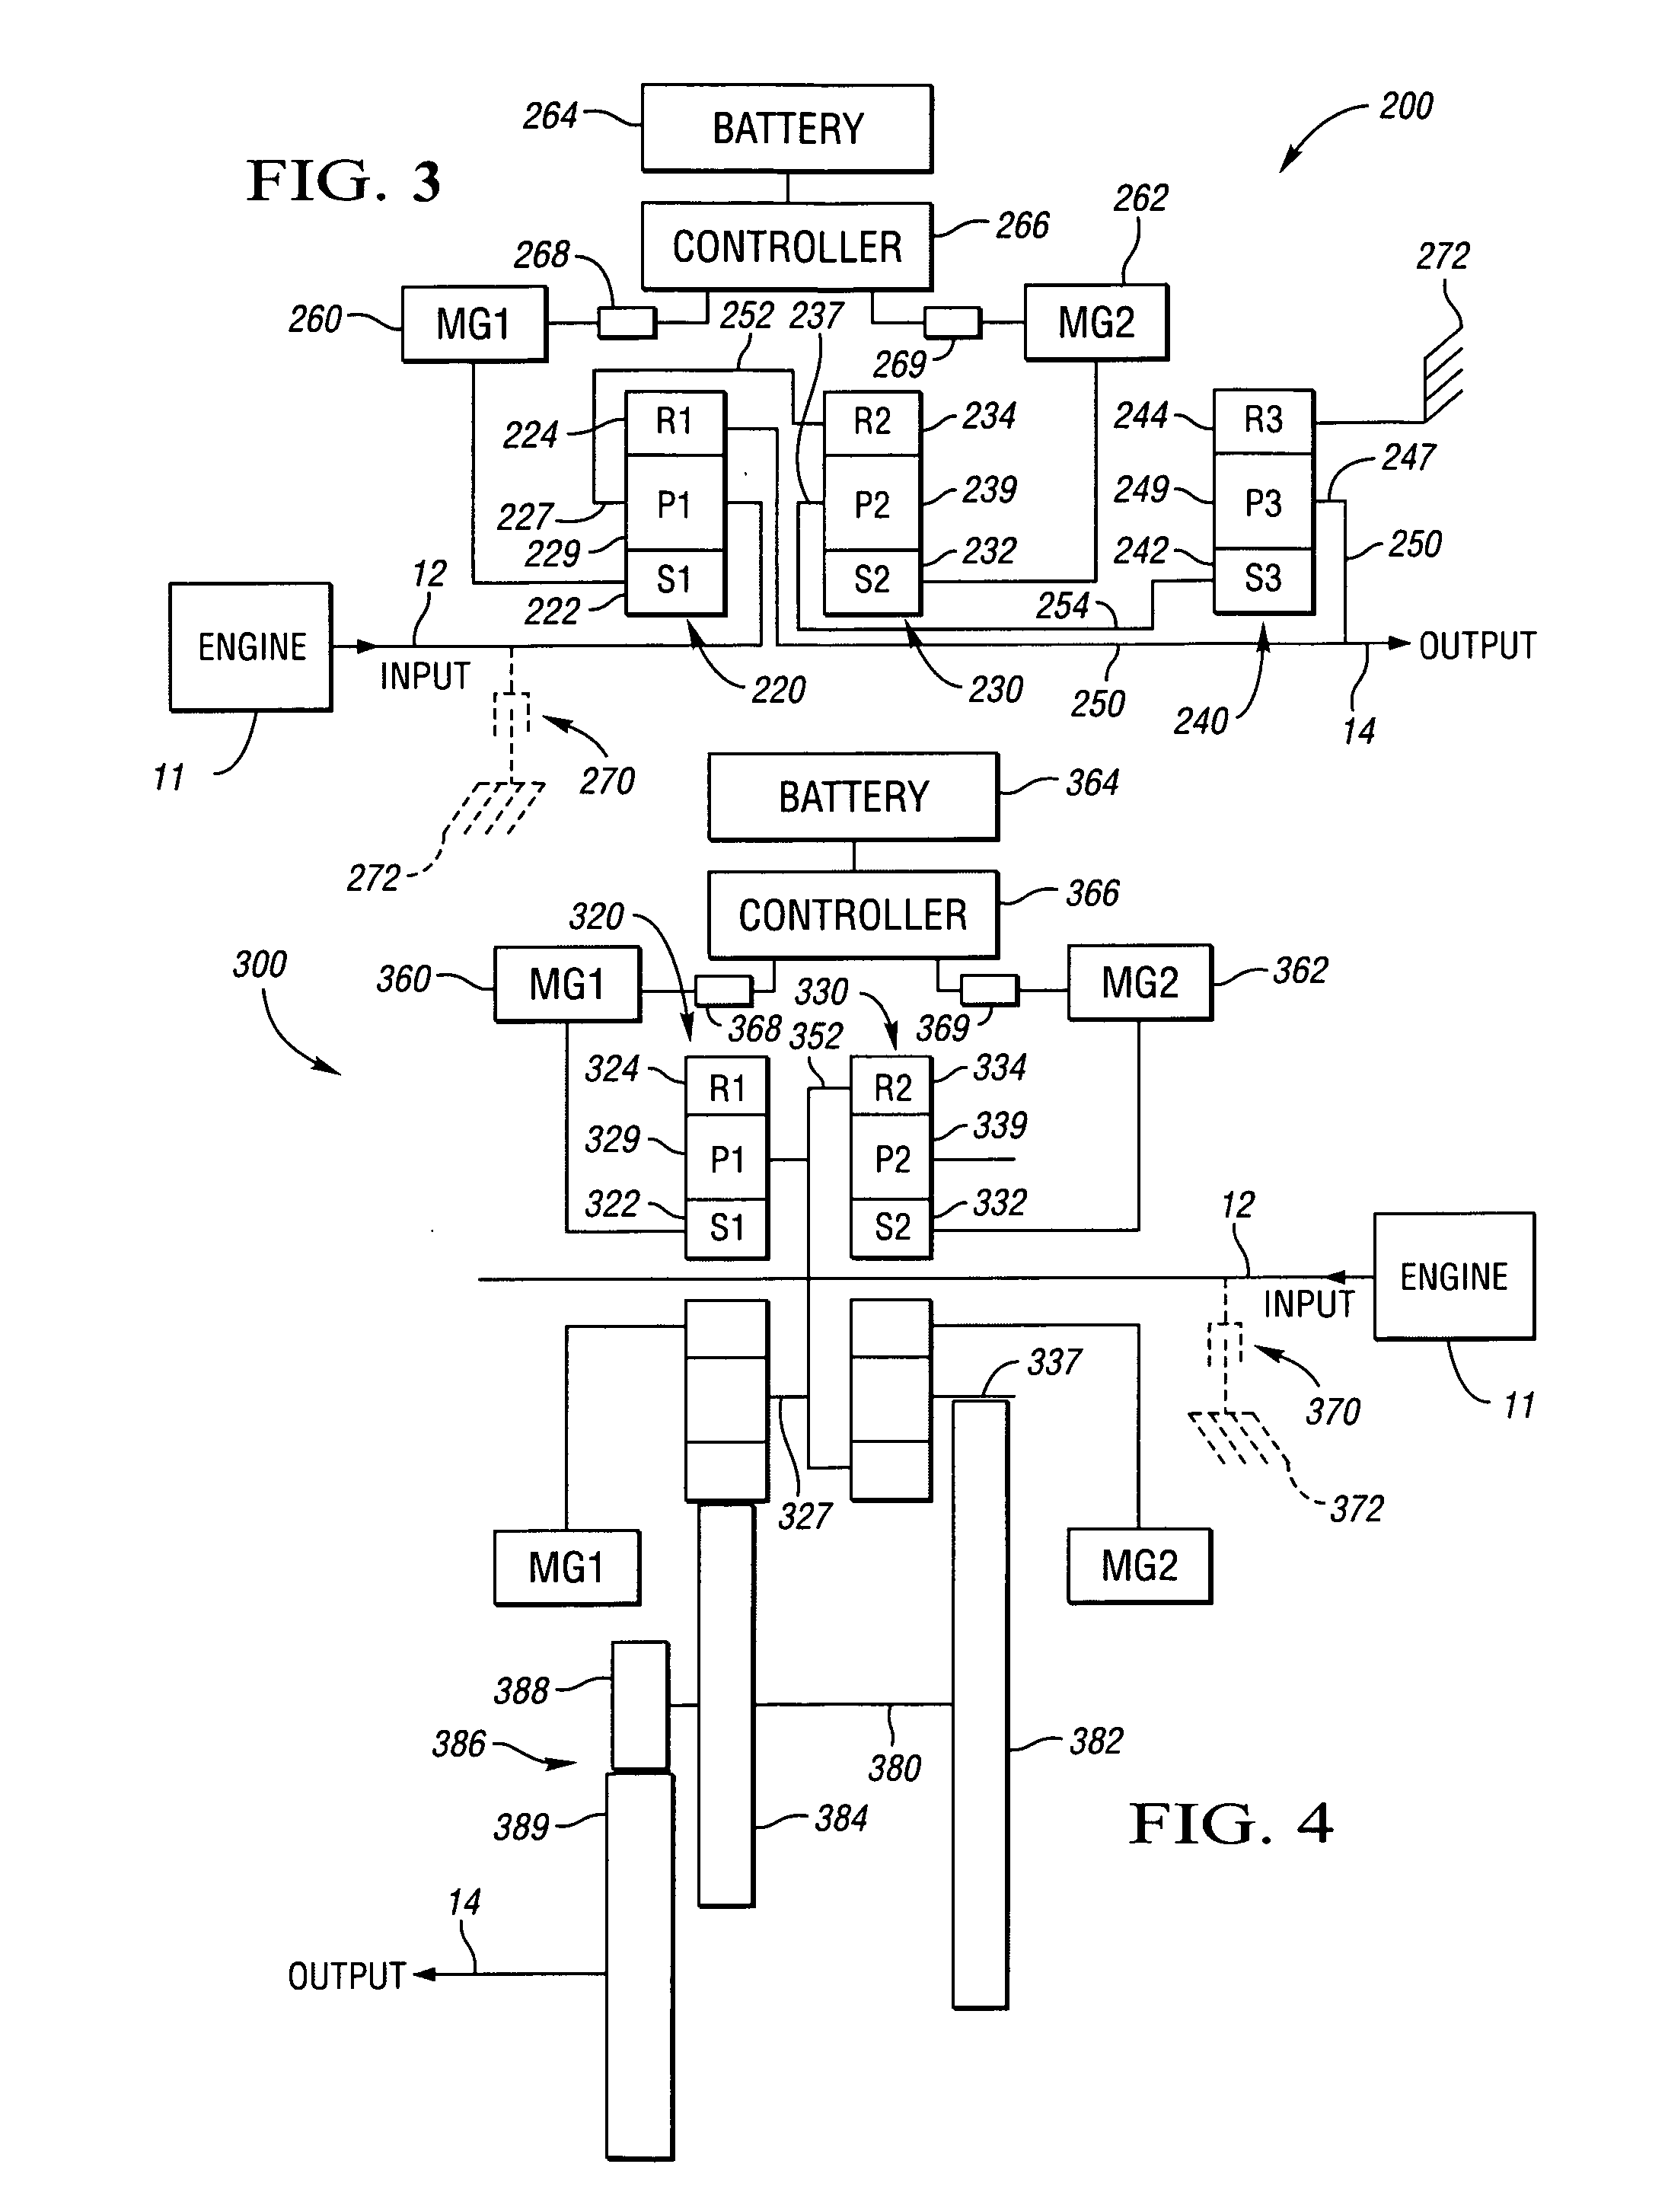 Single mode, compound-split transmission with dual mechanical paths and fixed reduction ratio